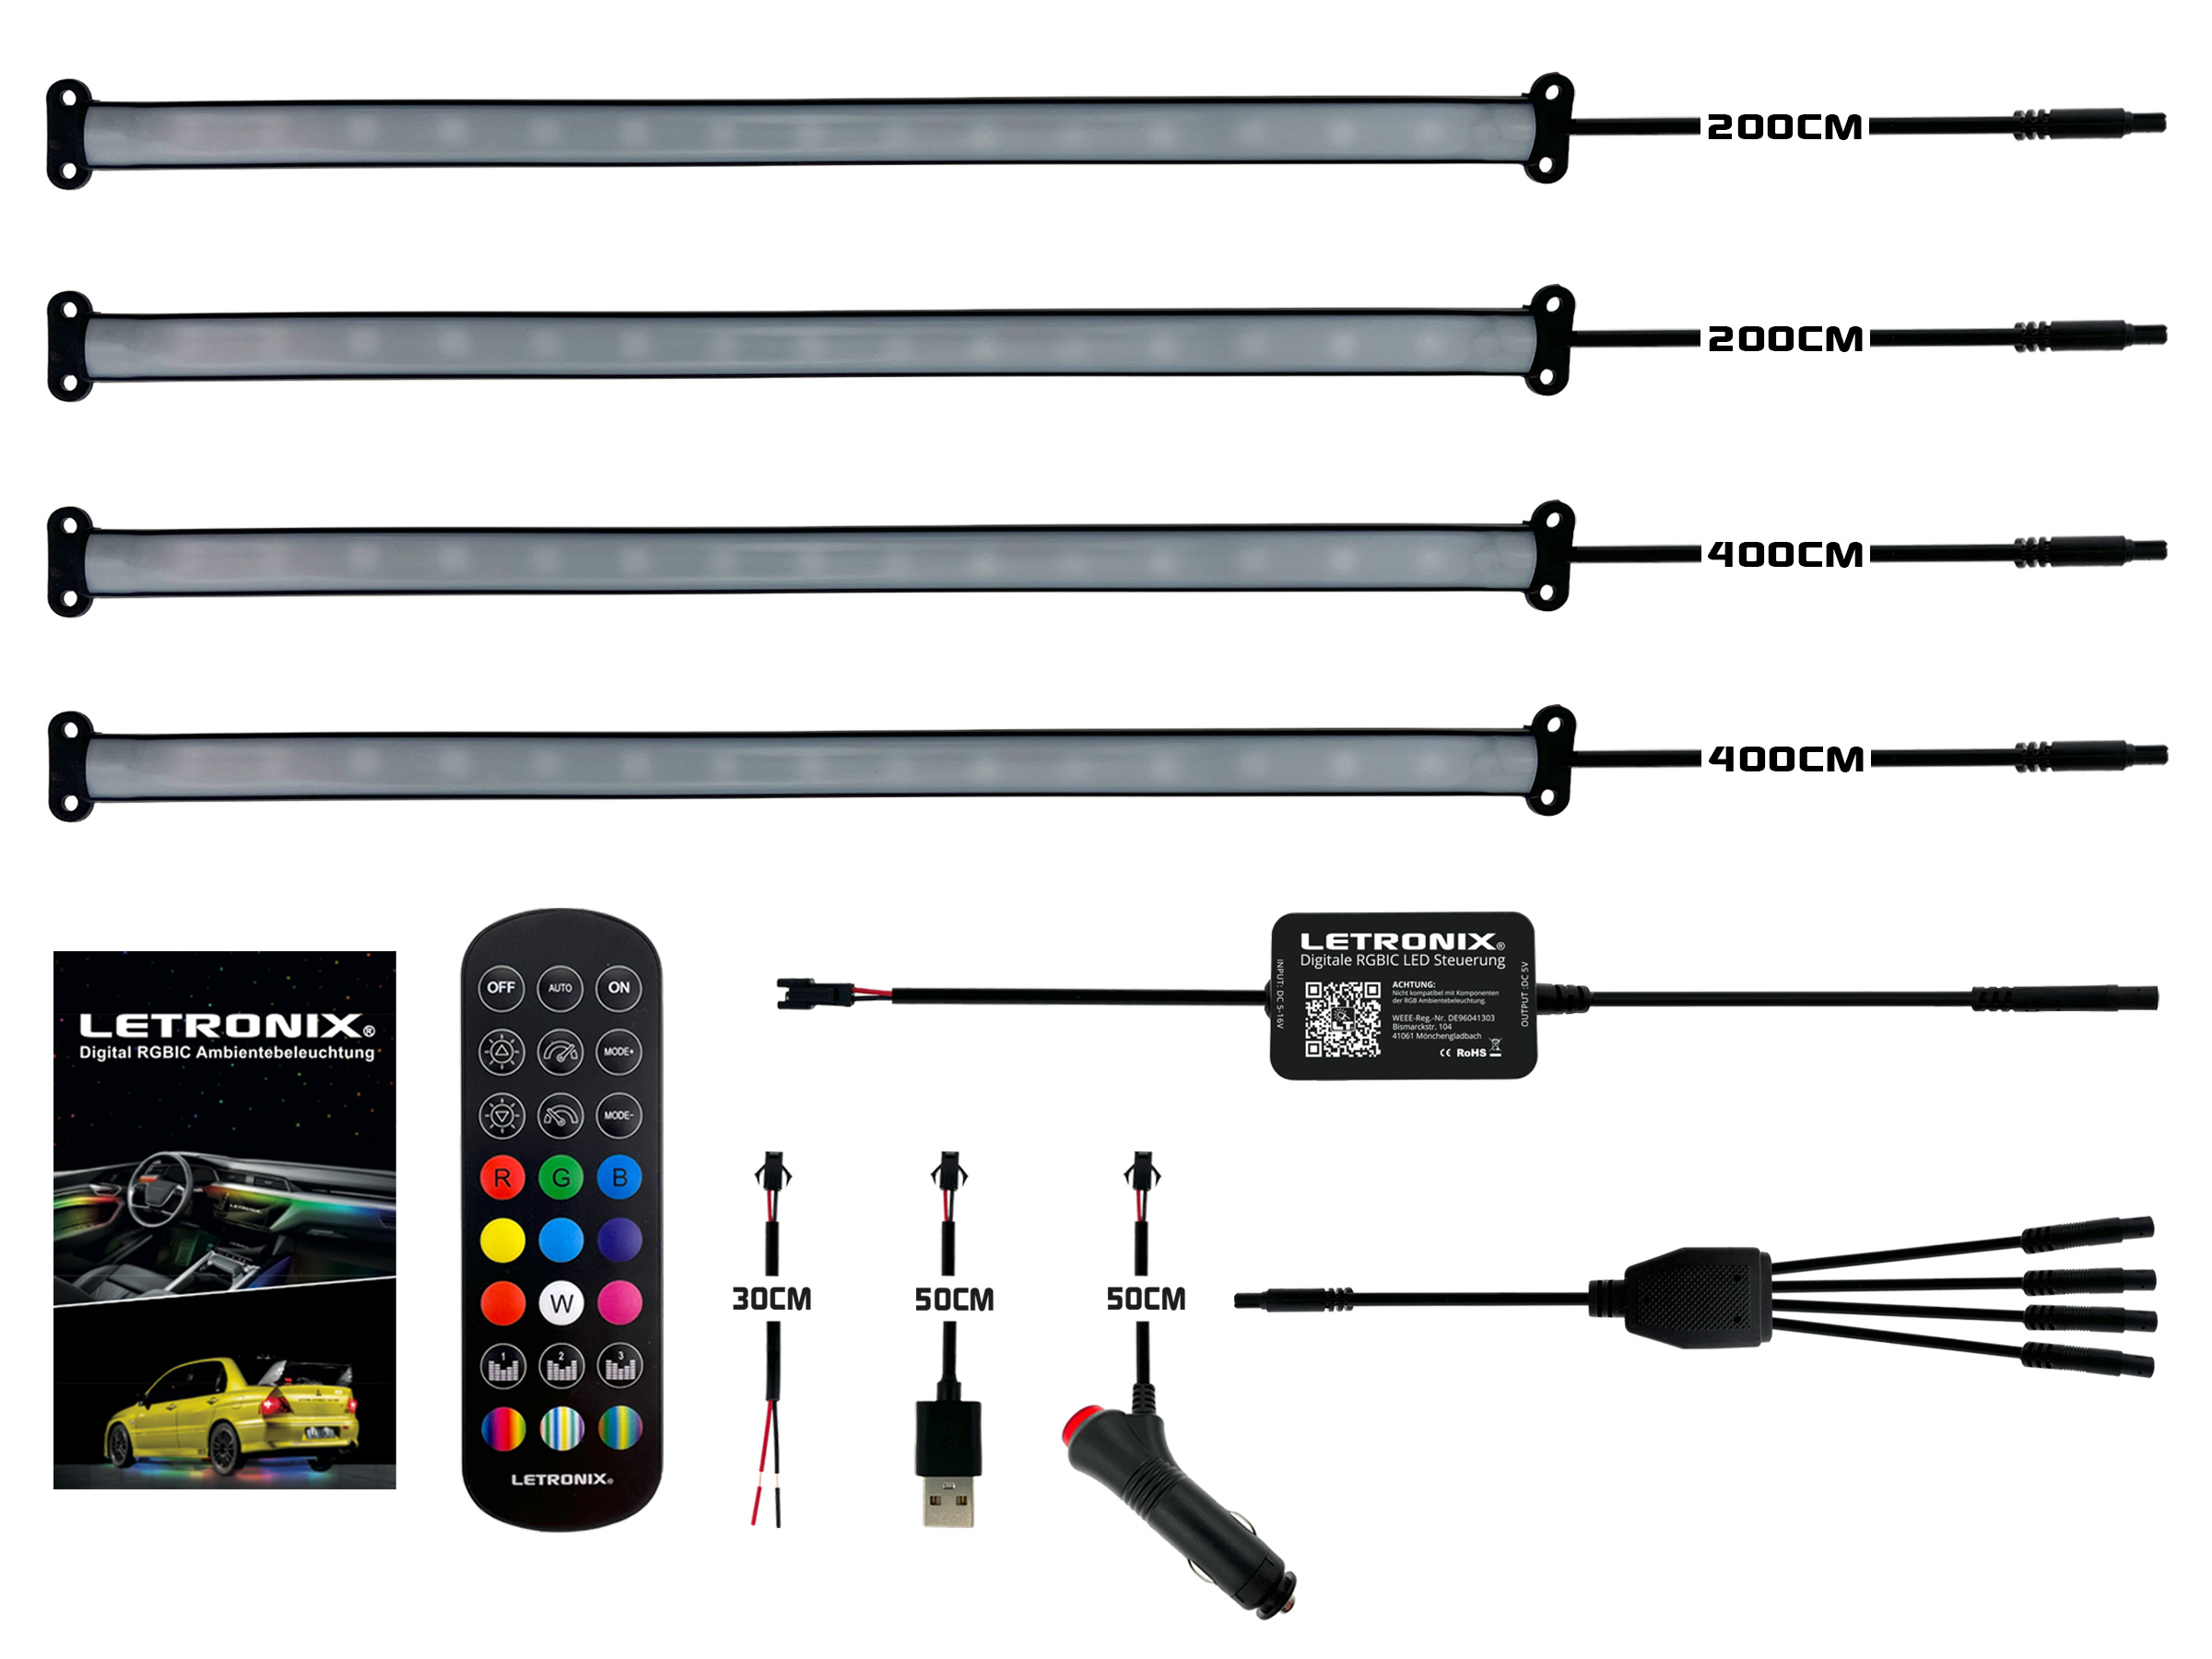 LETRONIX RGBIC RGB Full LED Rainbow Ambientebeleuchtung mit App